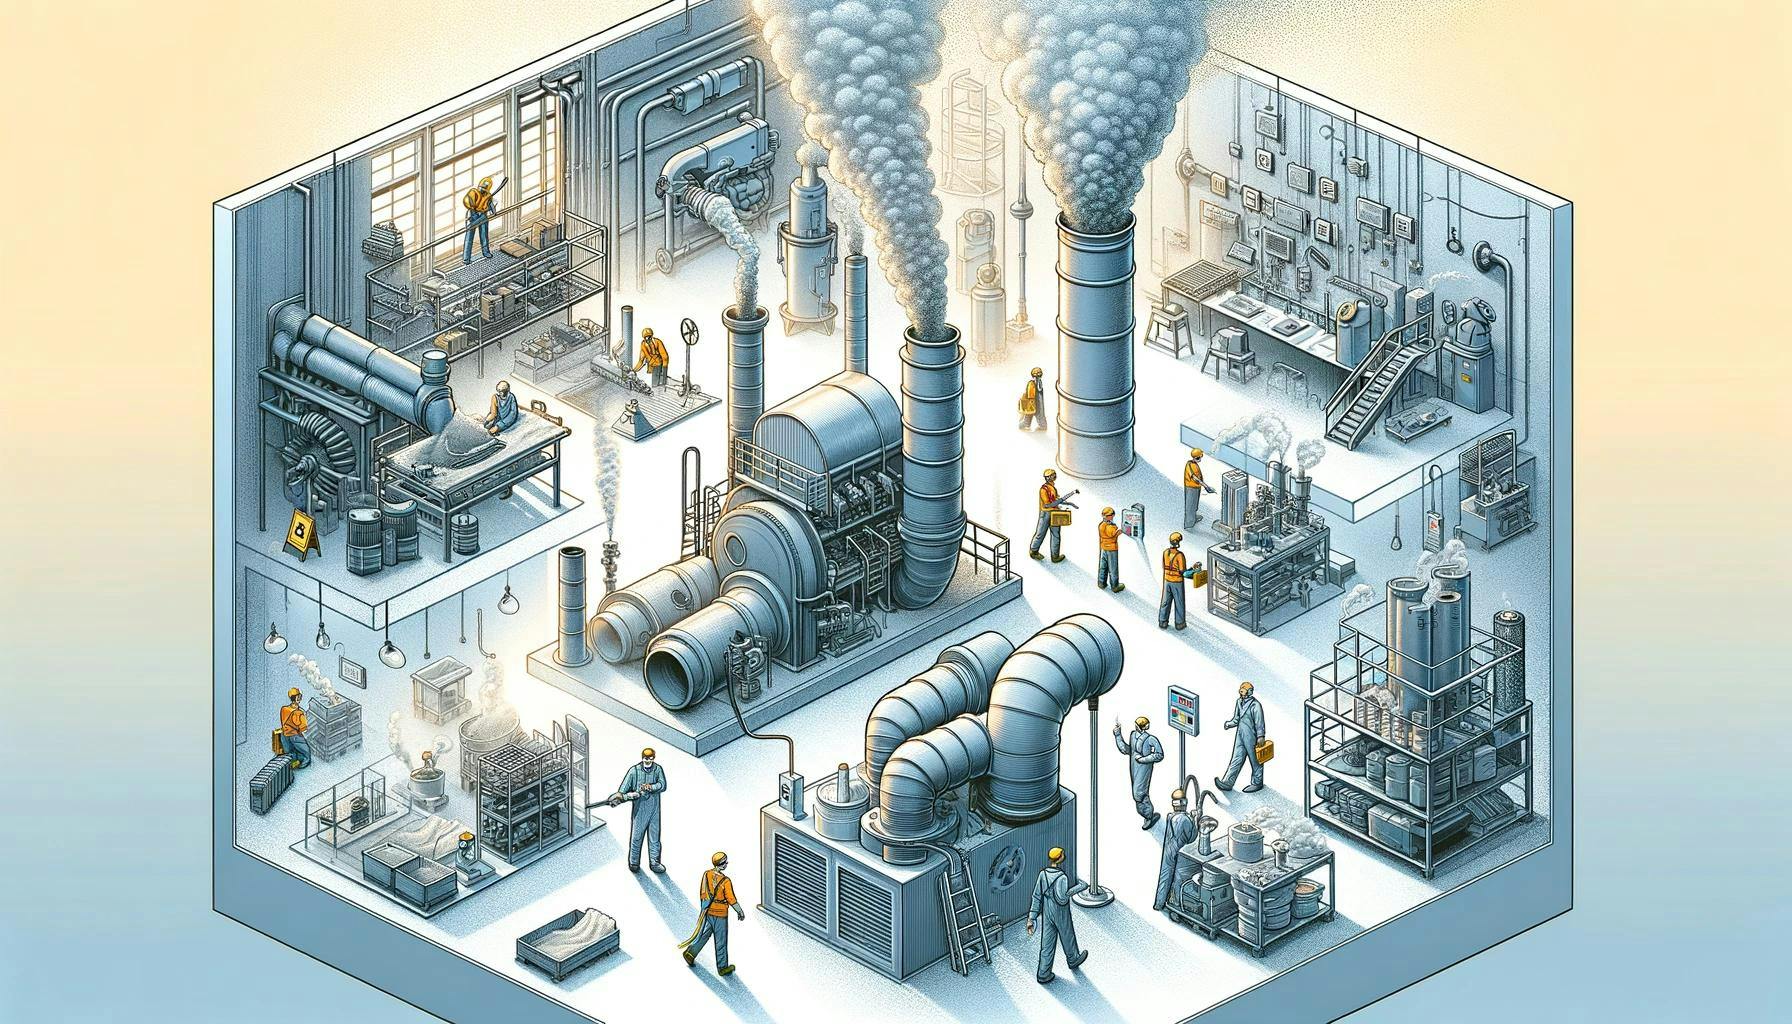 Illustration of a factory with local fumes